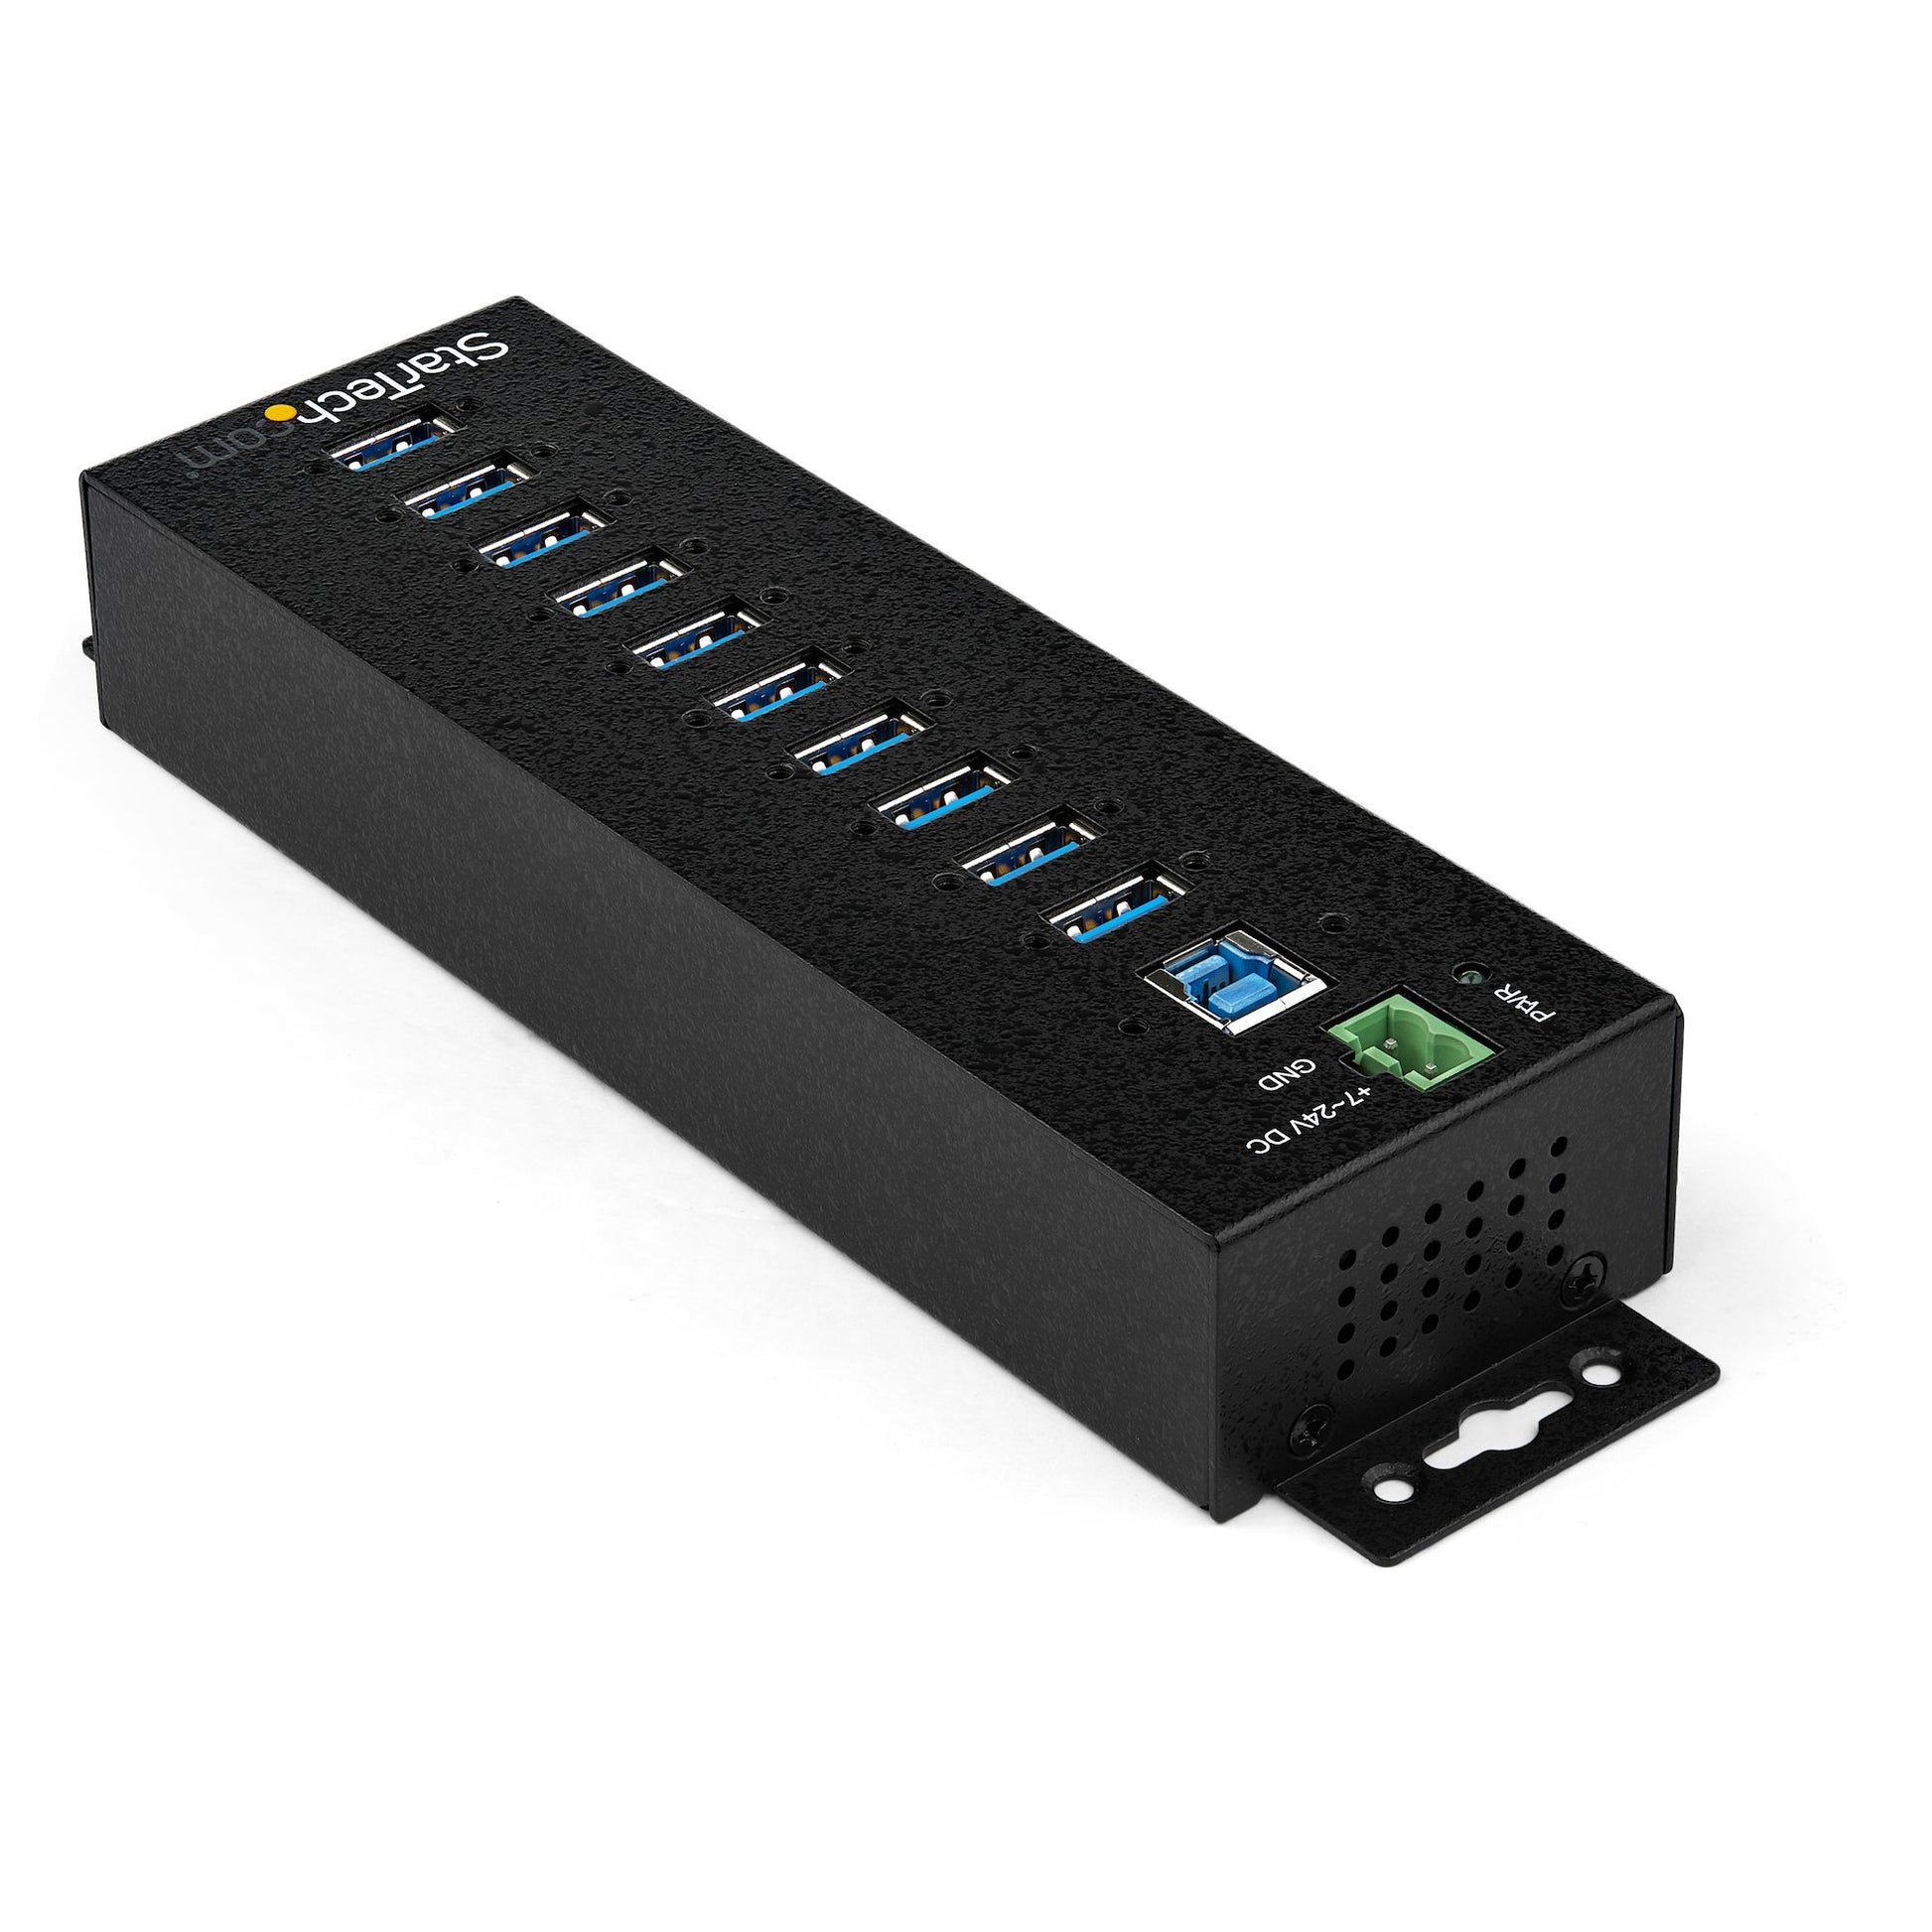 StarTech.com 10-Port USB 3.0 Hub with Power Adapter - Metal Industrial USB-A Hub with ESD & 350W Surge Protection - Din/Wall/Desk Mountable - High Speed USB 3.2 Gen 1 (5Gbps) Hub-1